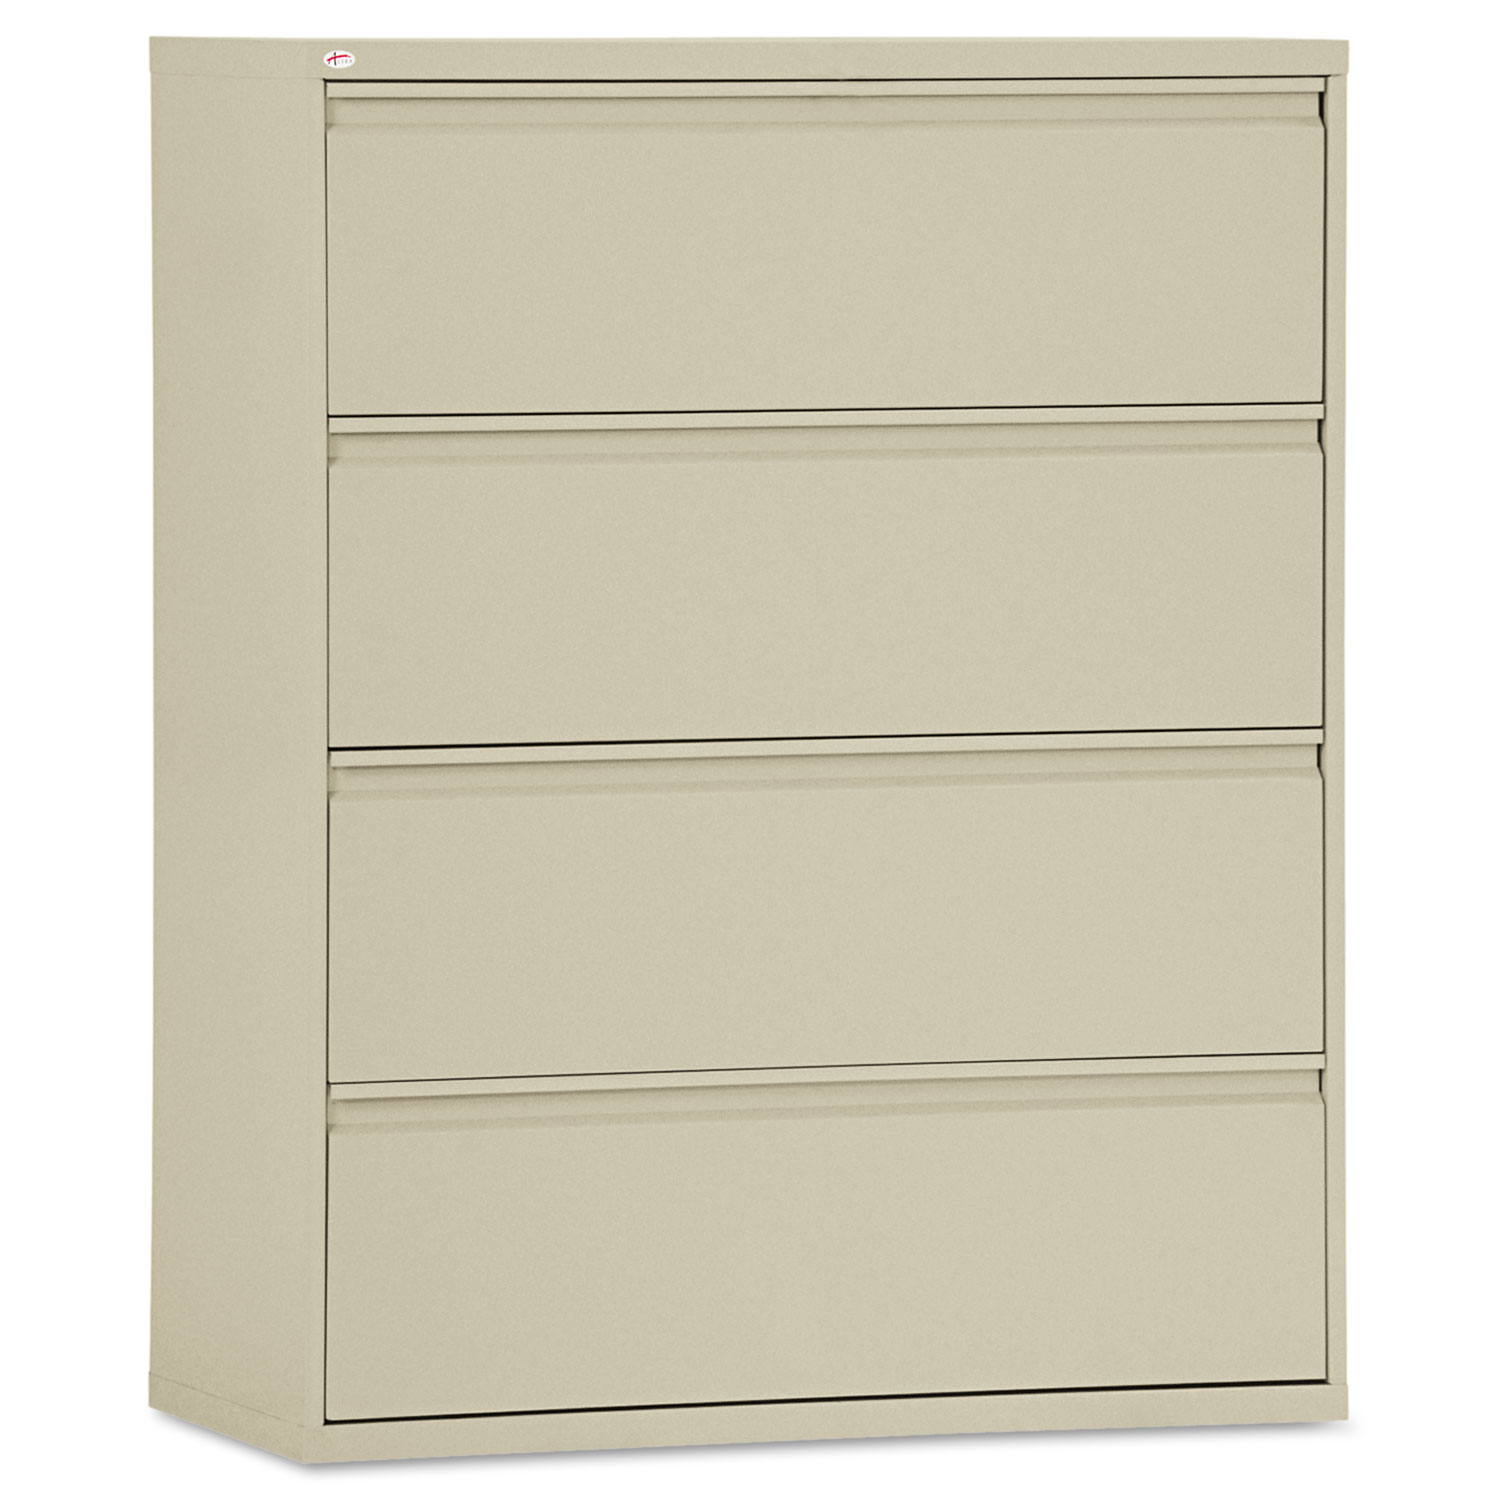 Alera Four-drawer Lateral File Cabinet, 42w X 18d X 52.5h, Putty - image 1 of 3